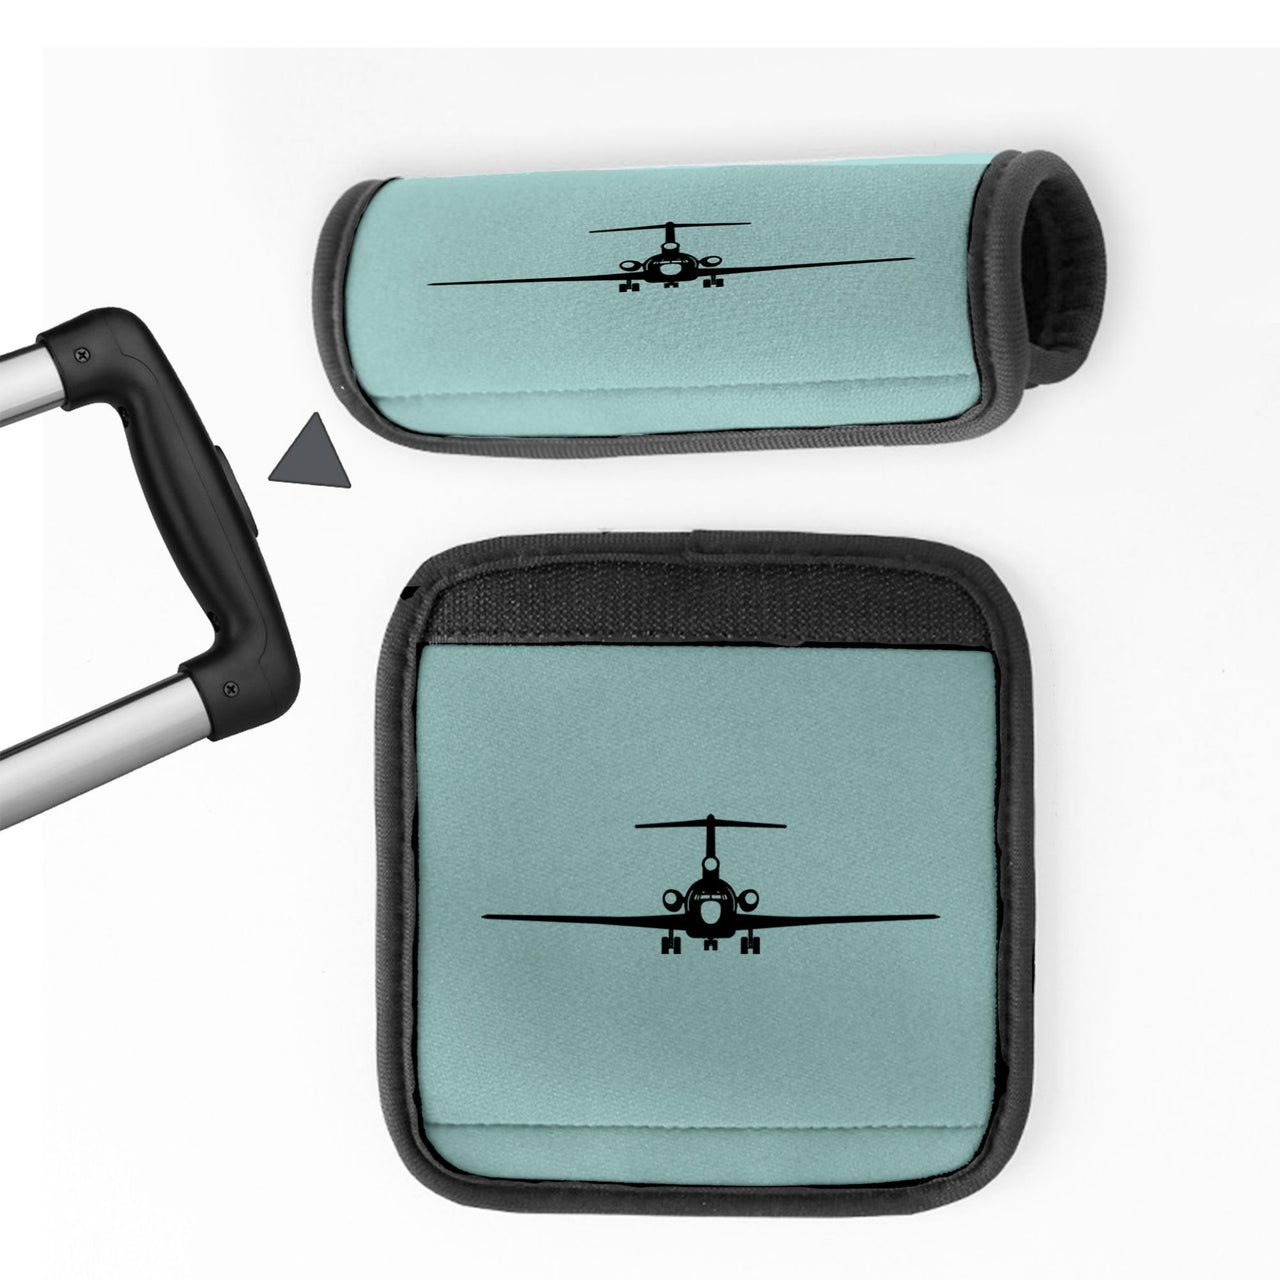 Boeing 727 Silhouette Designed Neoprene Luggage Handle Covers